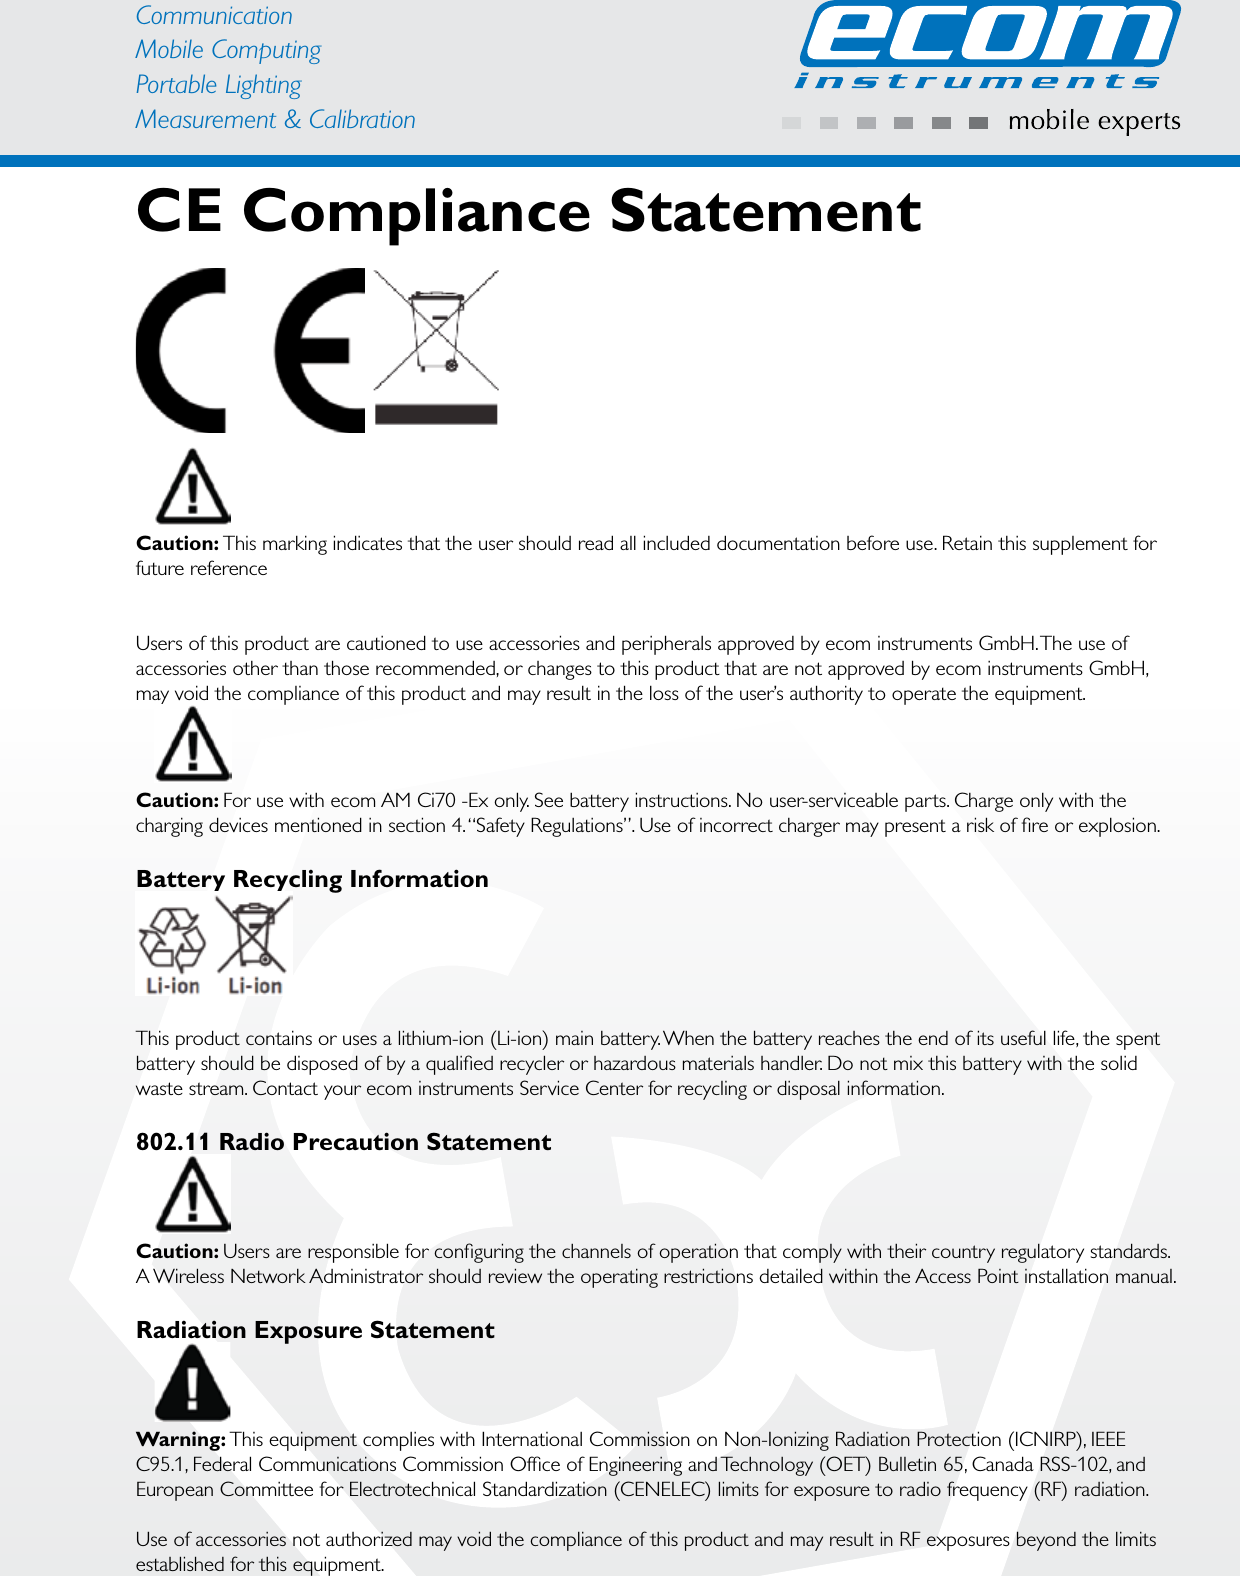 CommunicationMobile ComputingPortable Lighting Measurement &amp; CalibrationCE Compliance StatementCaution: This marking indicates that the user should read all included documentation before use. Retain this supplement for future referenceUsers of this product are cautioned to use accessories and peripherals approved by ecom instruments GmbH. The use of accessories other than those recommended, or changes to this product that are not approved by ecom instruments GmbH, may void the compliance of this product and may result in the loss of the user’s authority to operate the equipment.Caution: For use with ecom AM Ci70 -Ex only. See battery instructions. No user-serviceable parts. Charge only with the charging devices mentioned in section 4. “Safety Regulations”. Use of incorrect charger may present a risk of ﬁ re or explosion.Battery Recycling InformationThis product contains or uses a lithium-ion (Li-ion) main battery. When the battery reaches the end of its useful life, the spent battery should be disposed of by a qualiﬁ ed recycler or hazardous materials handler. Do not mix this battery with the solid waste stream. Contact your ecom instruments Service Center for recycling or disposal information.802.11 Radio Precaution StatementCaution: Users are responsible for conﬁ guring the channels of operation that comply with their country regulatory standards. A Wireless Network Administrator should review the operating restrictions detailed within the Access Point installation manual.Radiation Exposure StatementWarning: This equipment complies with International Commission on Non-Ionizing Radiation Protection (ICNIRP), IEEE C95.1, Federal Communications Commission Ofﬁ ce of Engineering and Technology (OET) Bulletin 65, Canada RSS-102, and European Committee for Electrotechnical Standardization (CENELEC) limits for exposure to radio frequency (RF) radiation.Use of accessories not authorized may void the compliance of this product and may result in RF exposures beyond the limits established for this equipment.